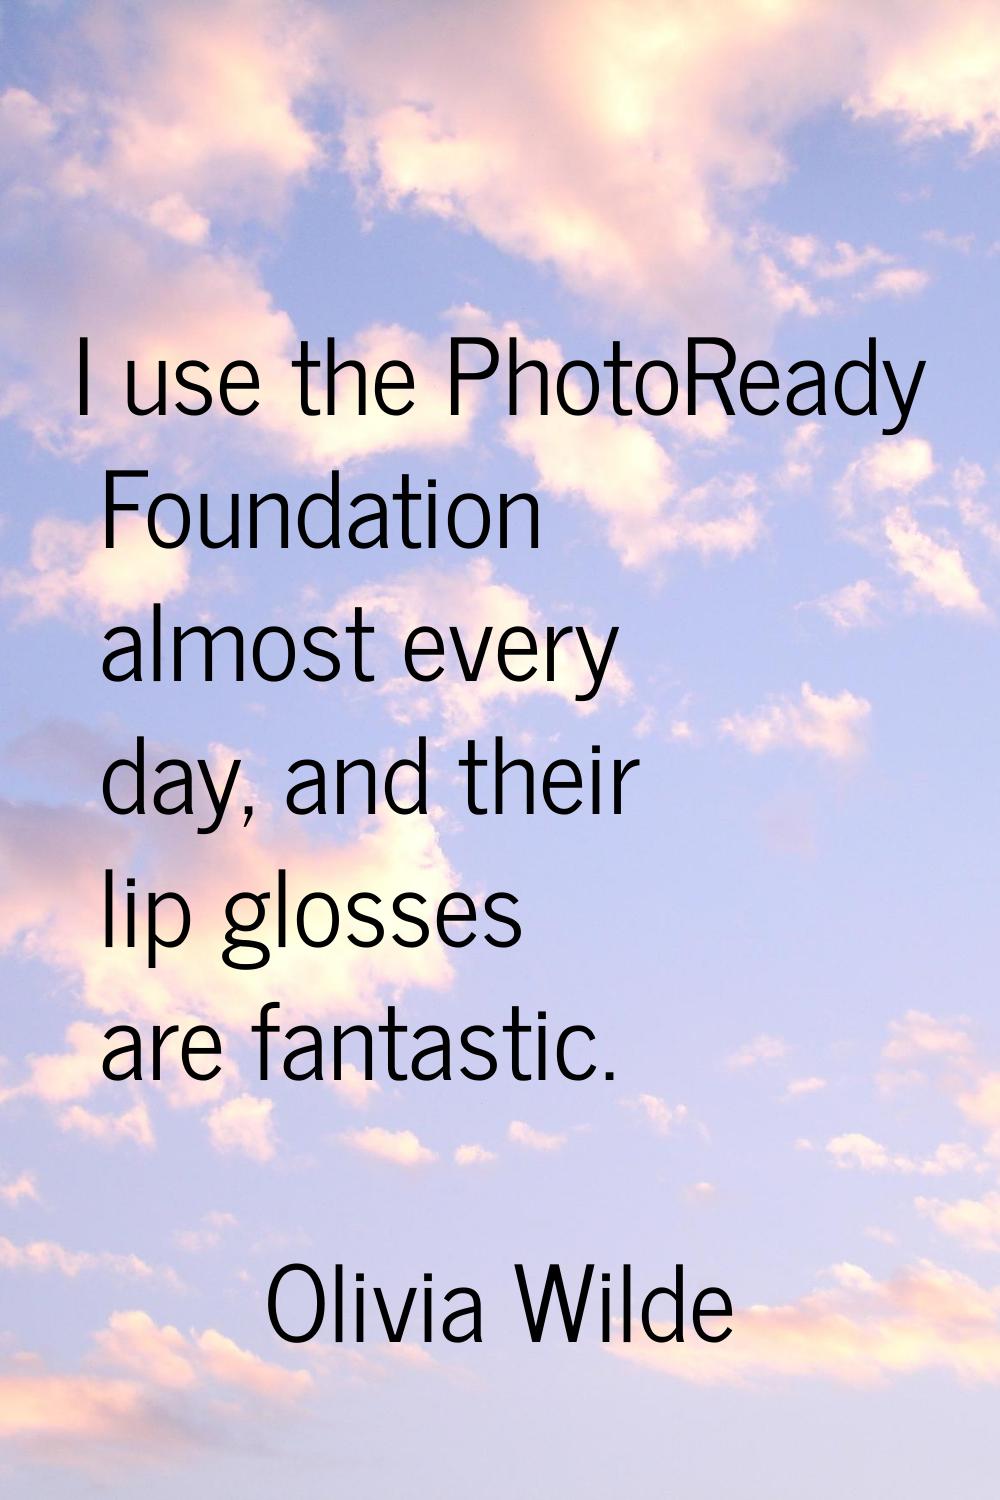 I use the PhotoReady Foundation almost every day, and their lip glosses are fantastic.